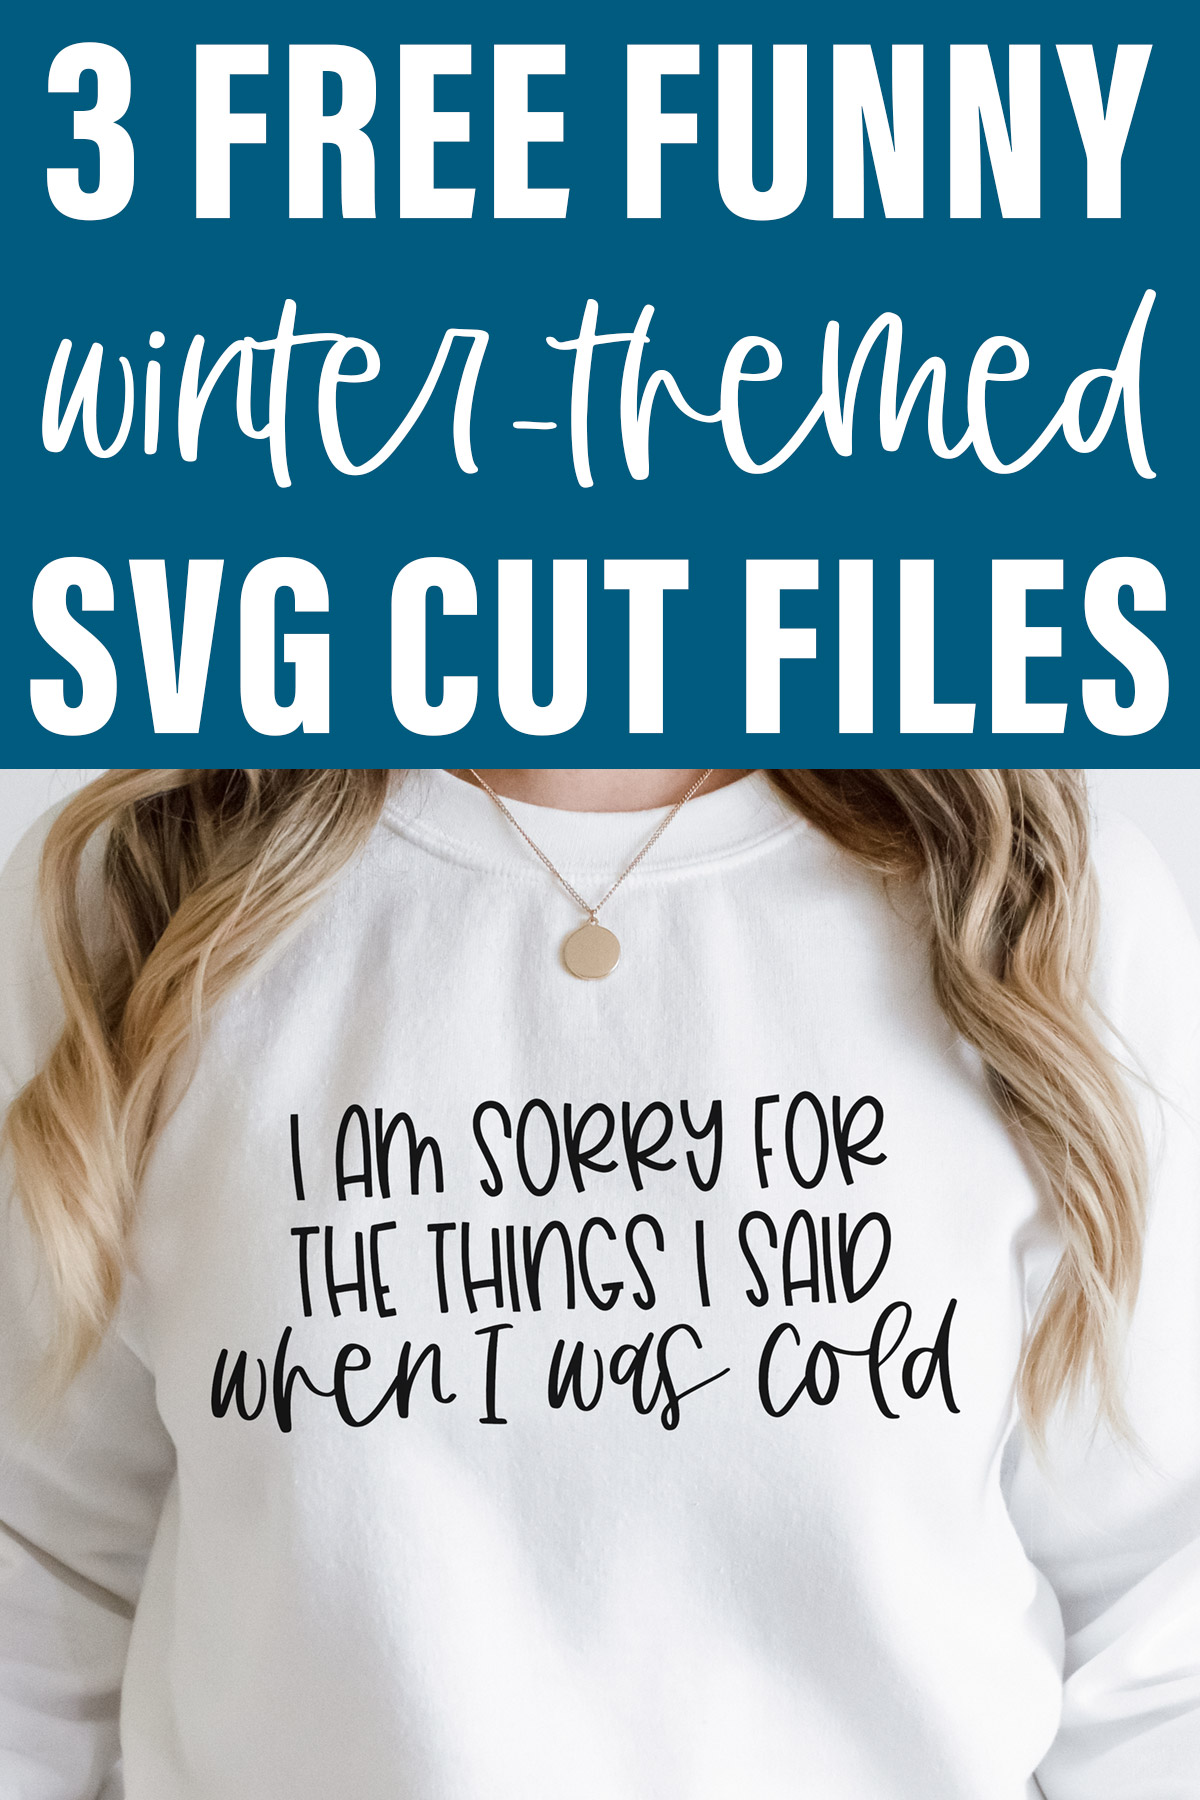 At the top it says 3 funny free winter-themed SVG cut files. Below that is a sweatshirt with “I am sorry for the things I said when I was cold” printed on it.